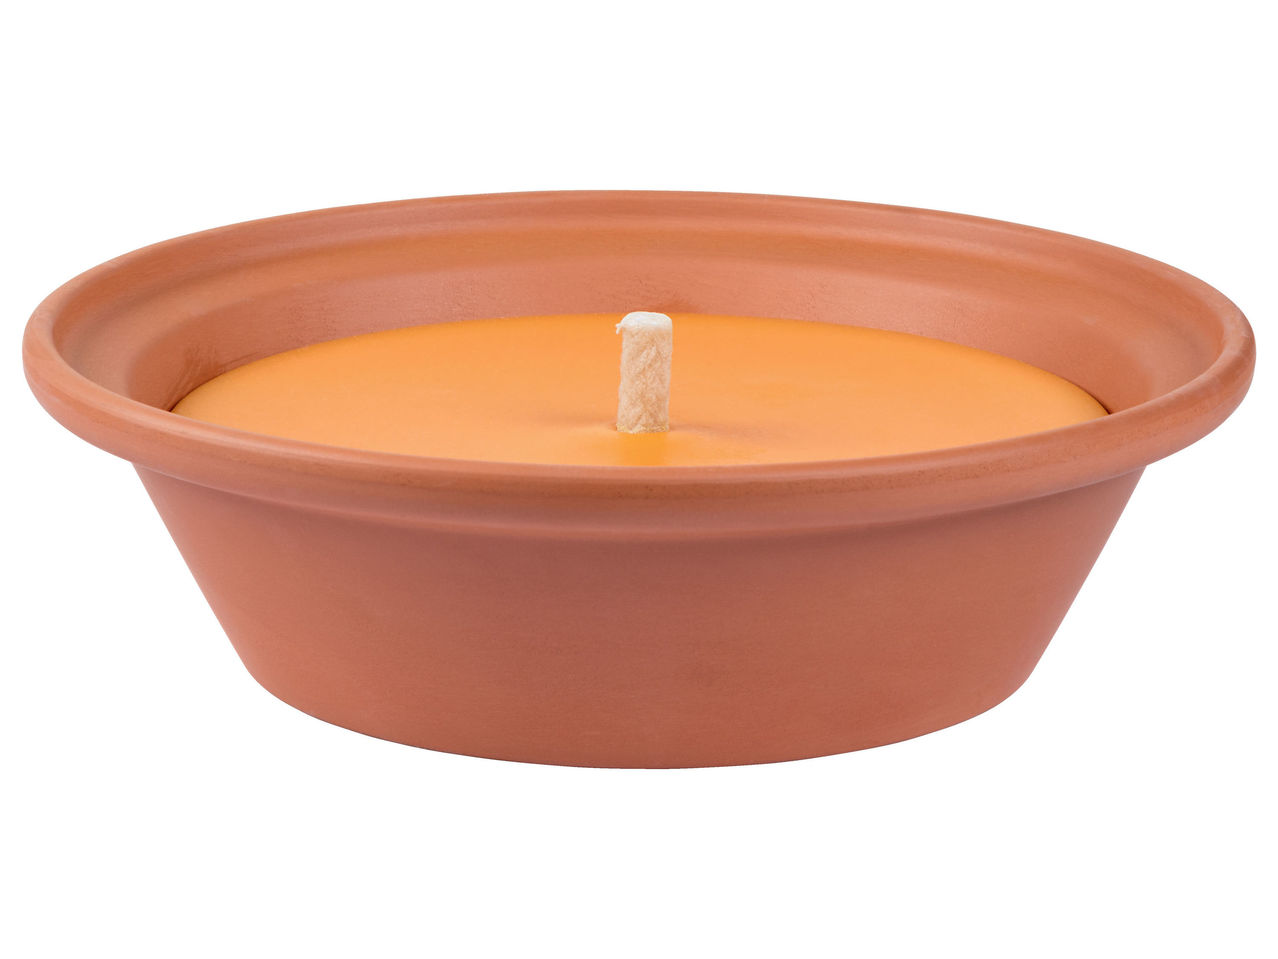 Candles in Ceramic Bowls